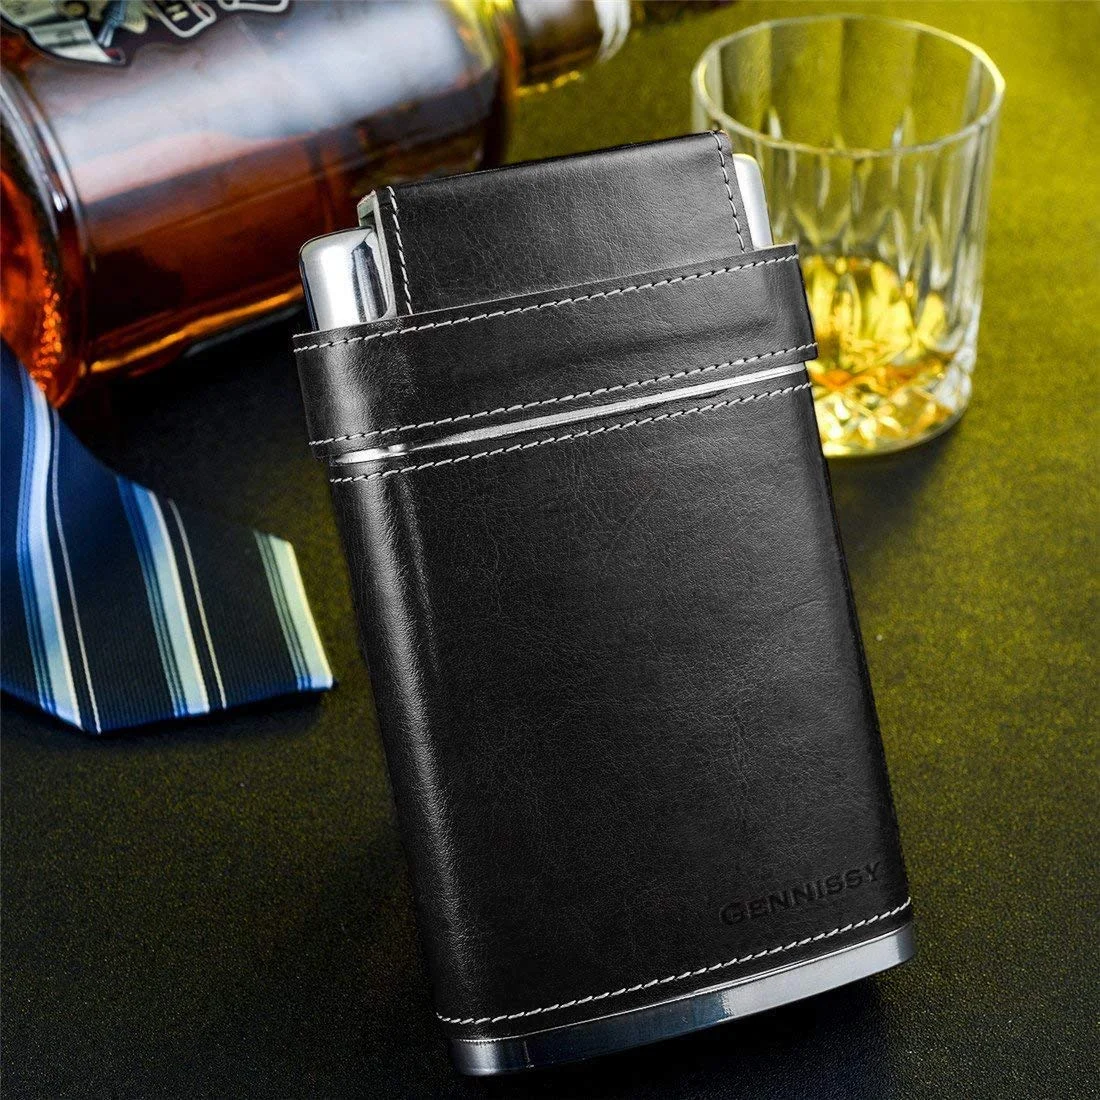 GENNISSY 8OZ Hip Flasks Stainless Steel Leather Whiskey Wine Pot Men Outdoor Portable Pockets Flask With 3 Cups and Funnel Gift